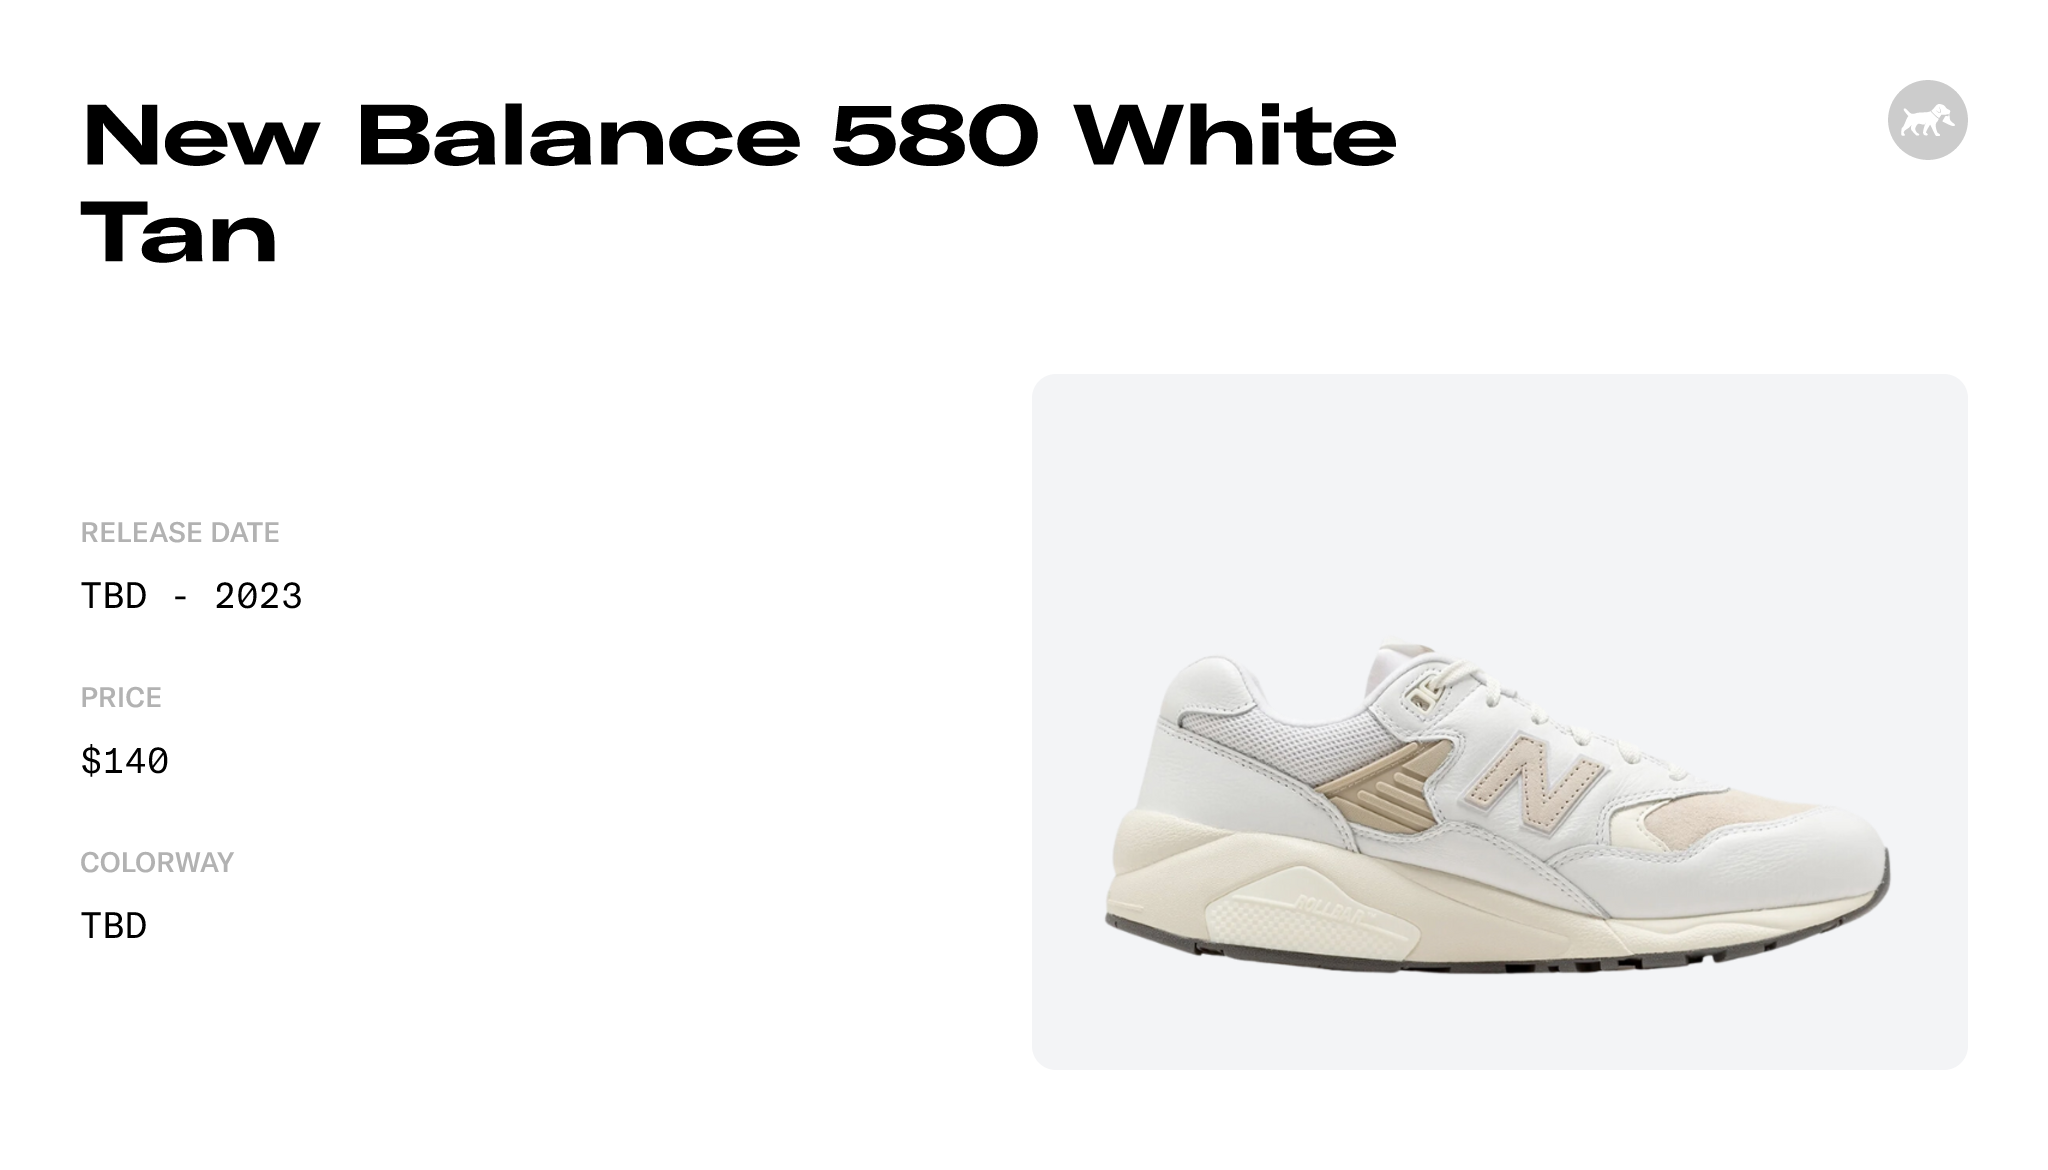 New Balance 580 White Tan - MT580VTG Raffles and Release Date